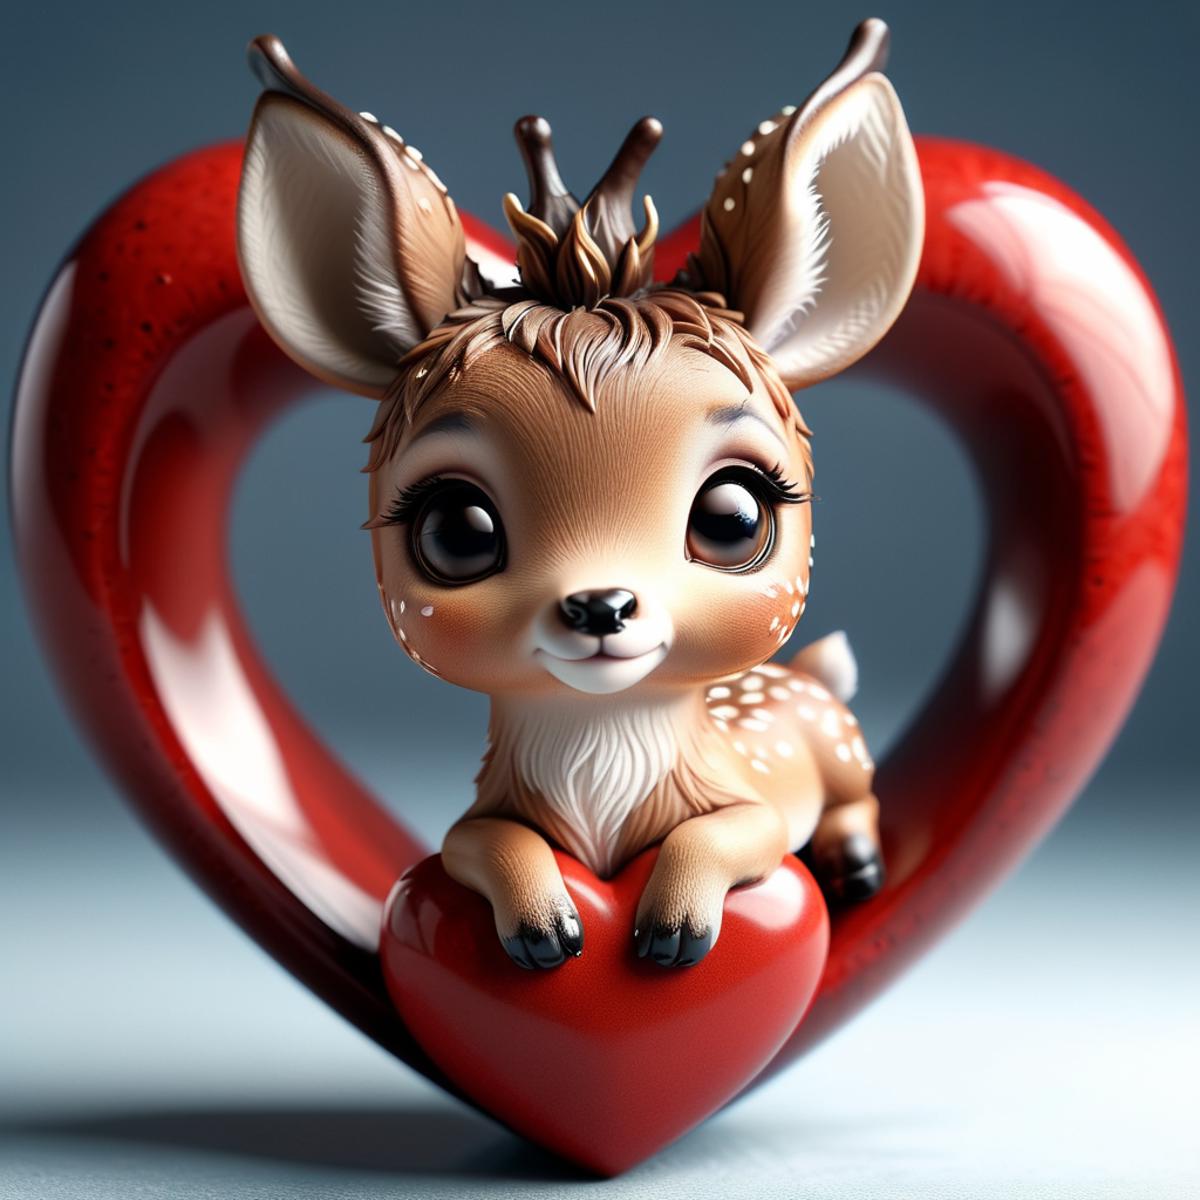 A Fawn Sitting in a Heart-Shaped Container